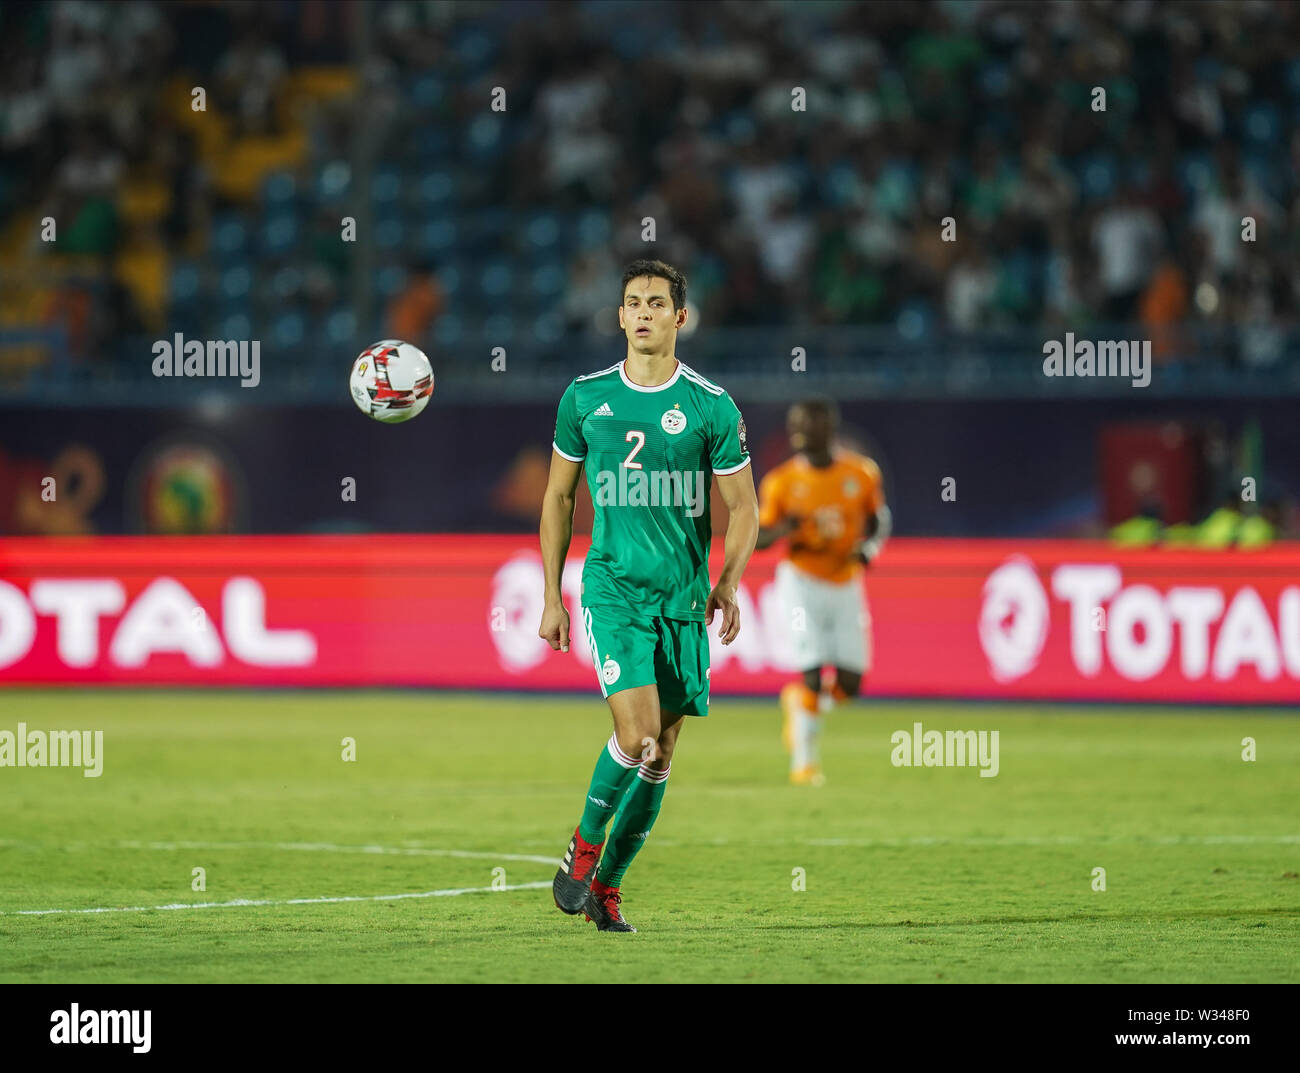 Suez, Egypt. 11th July, 2019. Ivory coast, Egypt - FRANCE OUT July 11, 2019: Aissa Mandi of Algeria during the 2019 African Cup of Nations match between Ivory coast and Algeria at the Suez Stadium in Suez, Egypt. Ulrik Pedersen/CSM/Alamy Live News Stock Photo